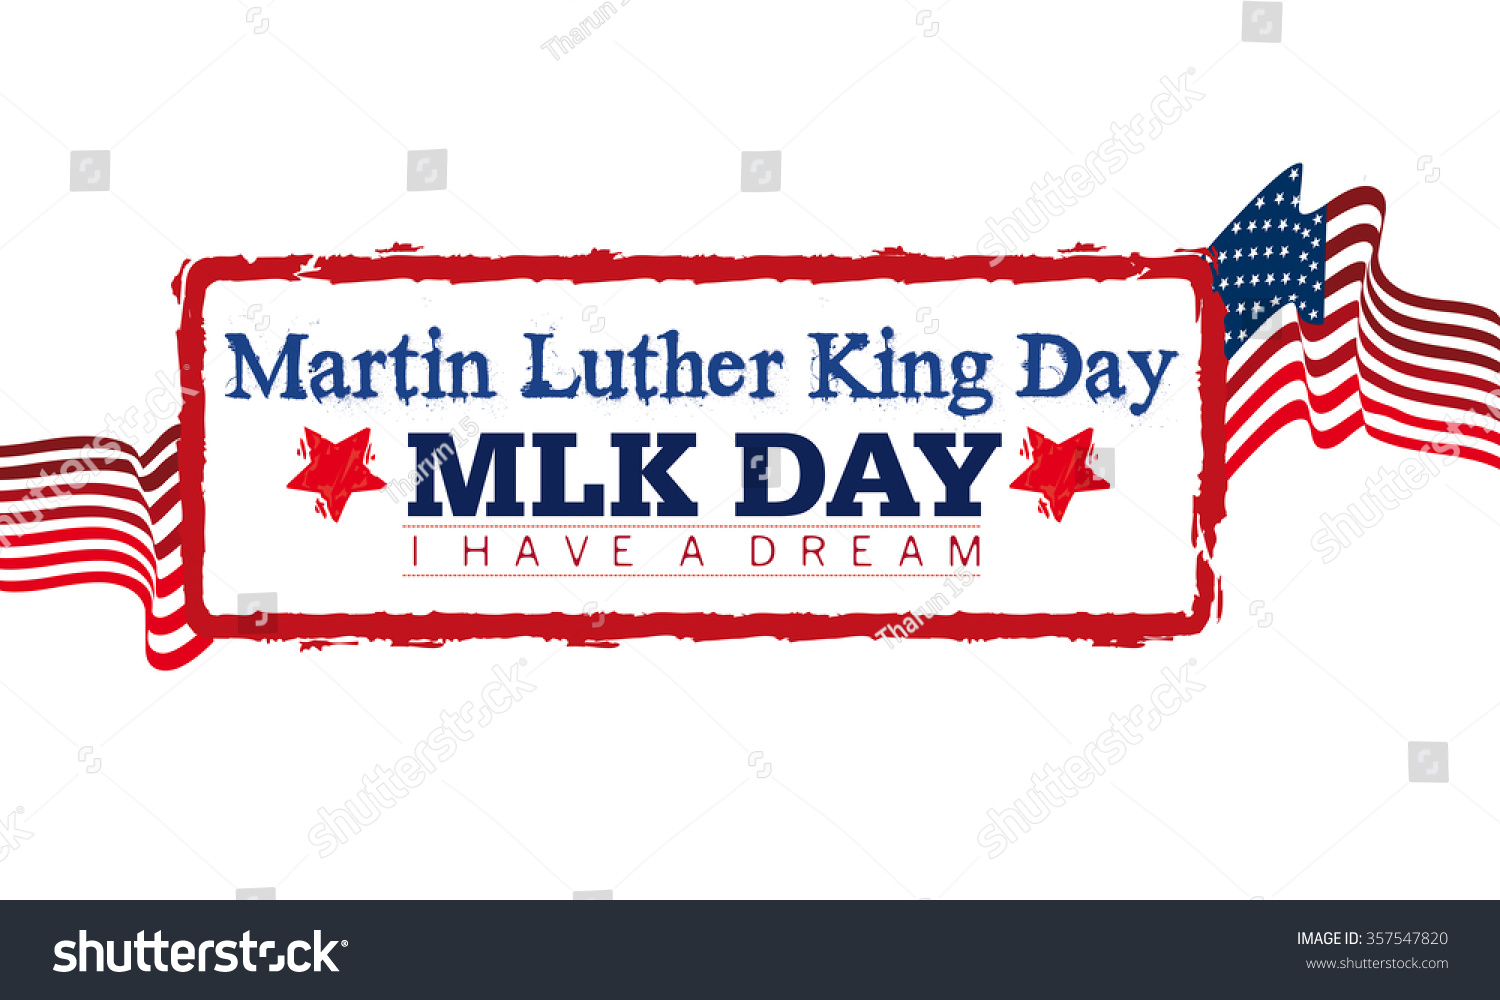 Martin Luther King Day Stock Photo 357547820 : Shutterstock1500 x 1000